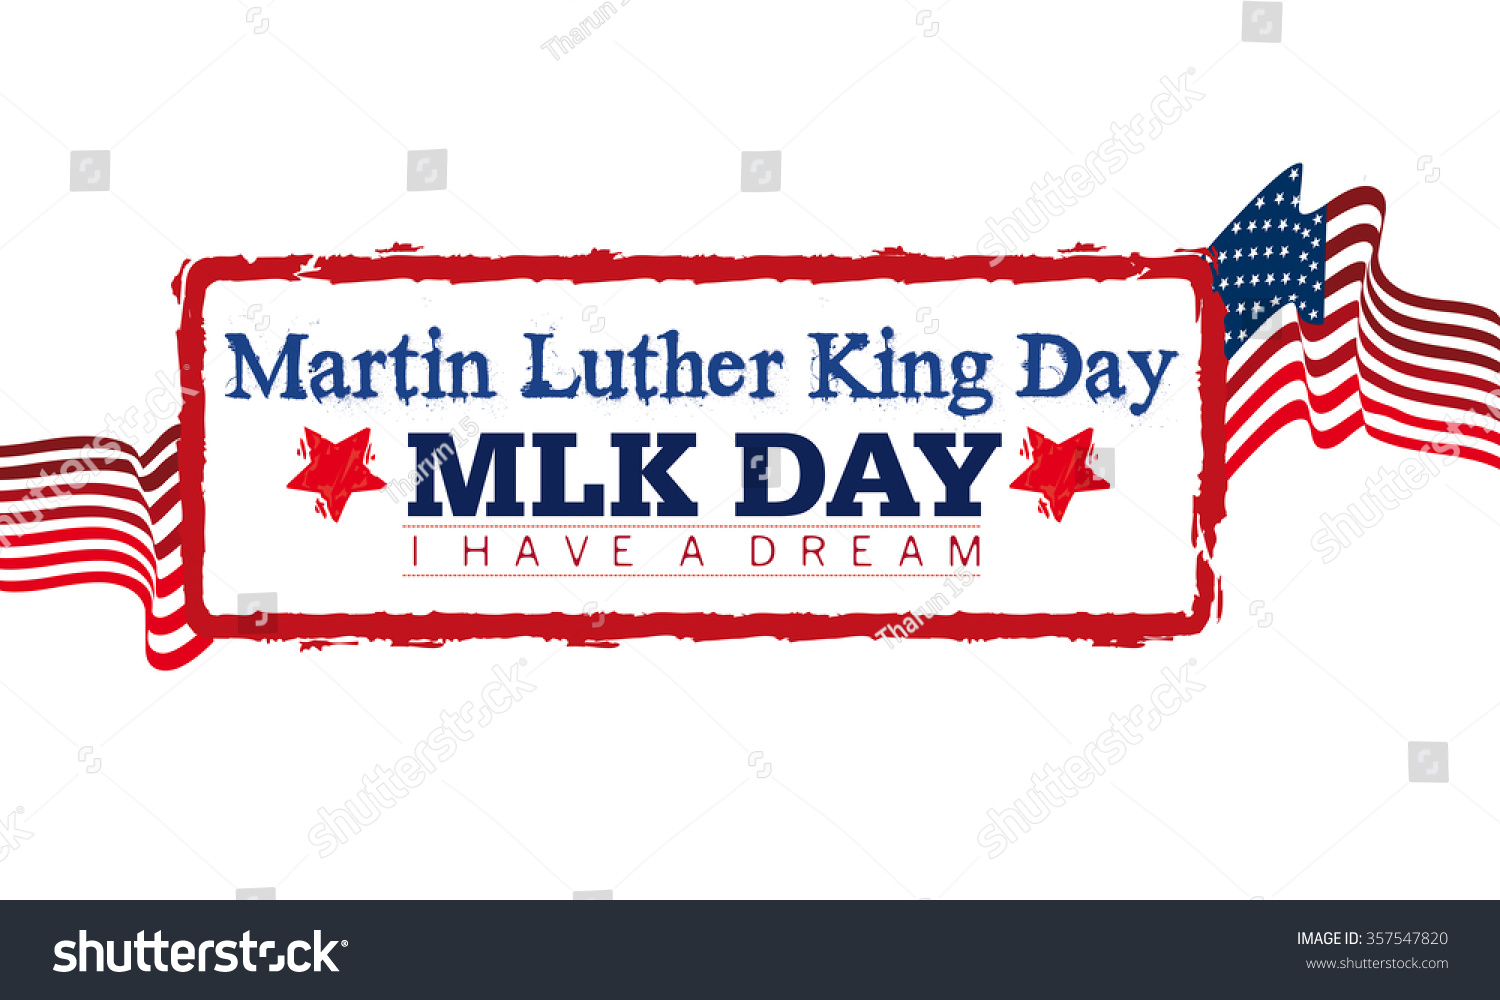 Martin Luther King Day Stock Photo 357547820 : Shutterstock1500 x 1000